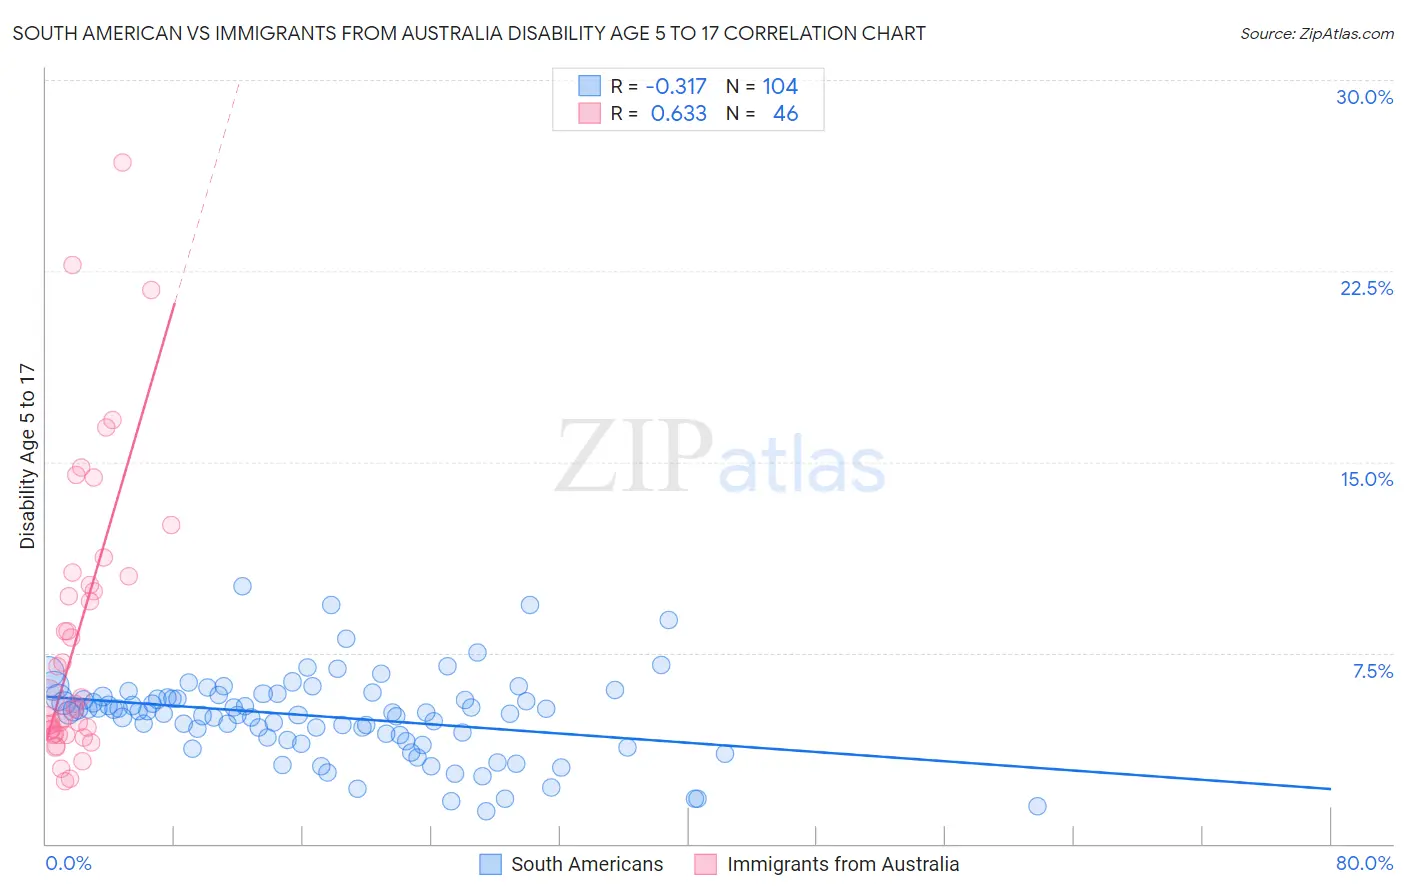 South American vs Immigrants from Australia Disability Age 5 to 17